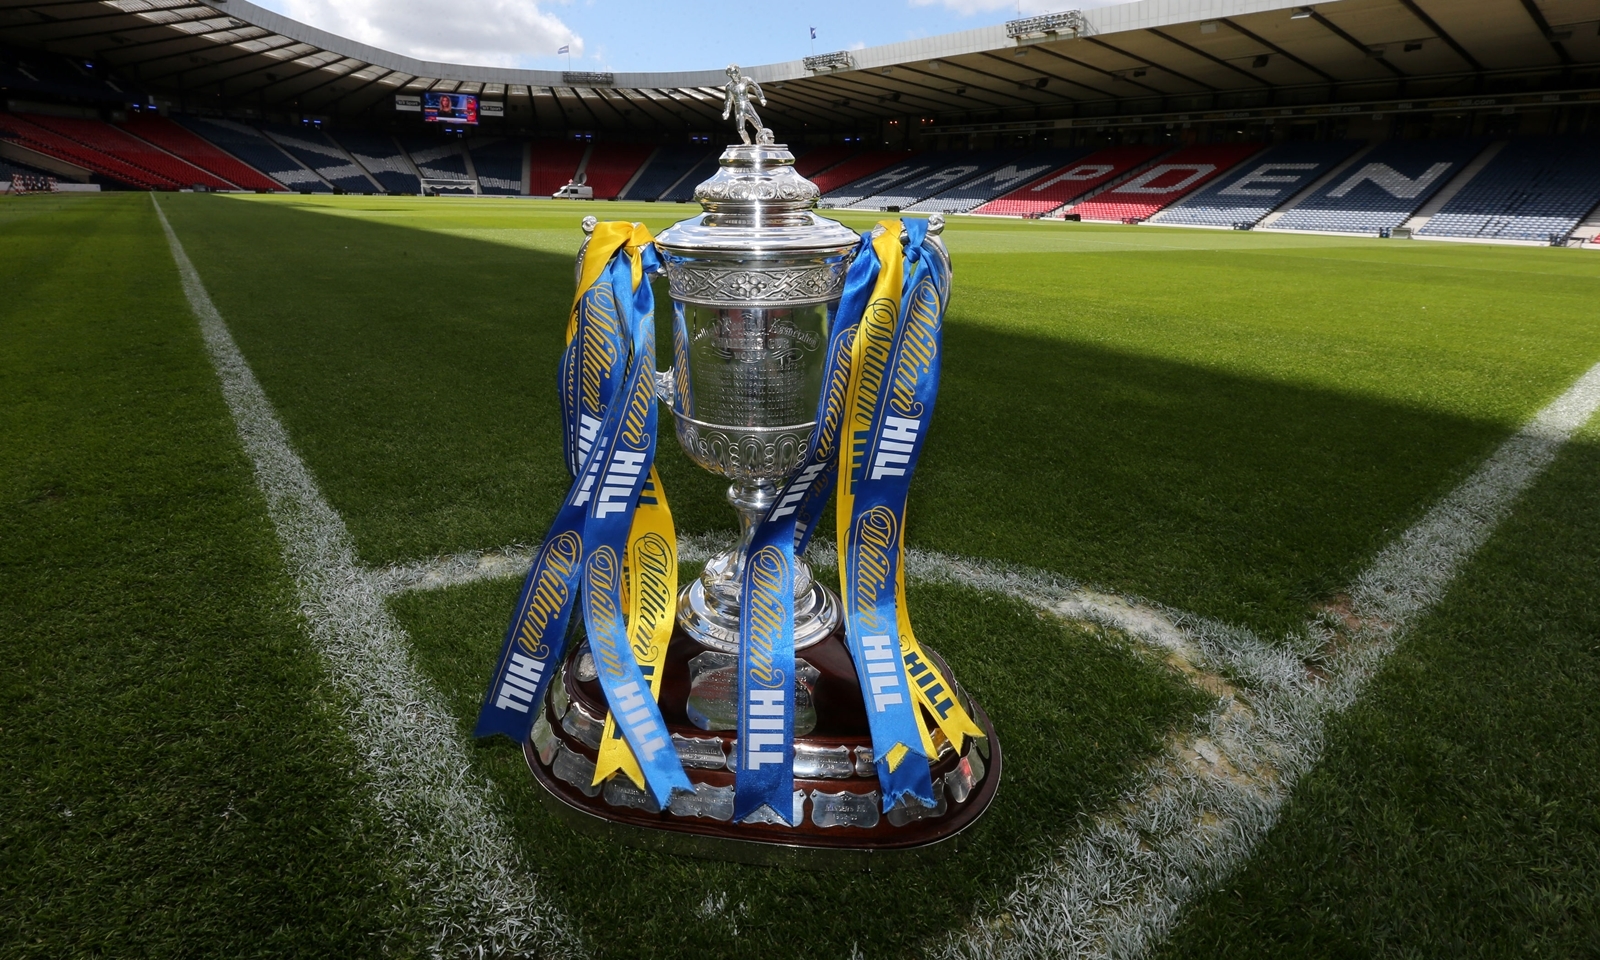 The William Hill Scottish Cup is displayed during a photocall at Hampden Park, Glasgow. Celtic will face Hibernian in the 2013 William Hill Scottish Cup Final on Sunday.